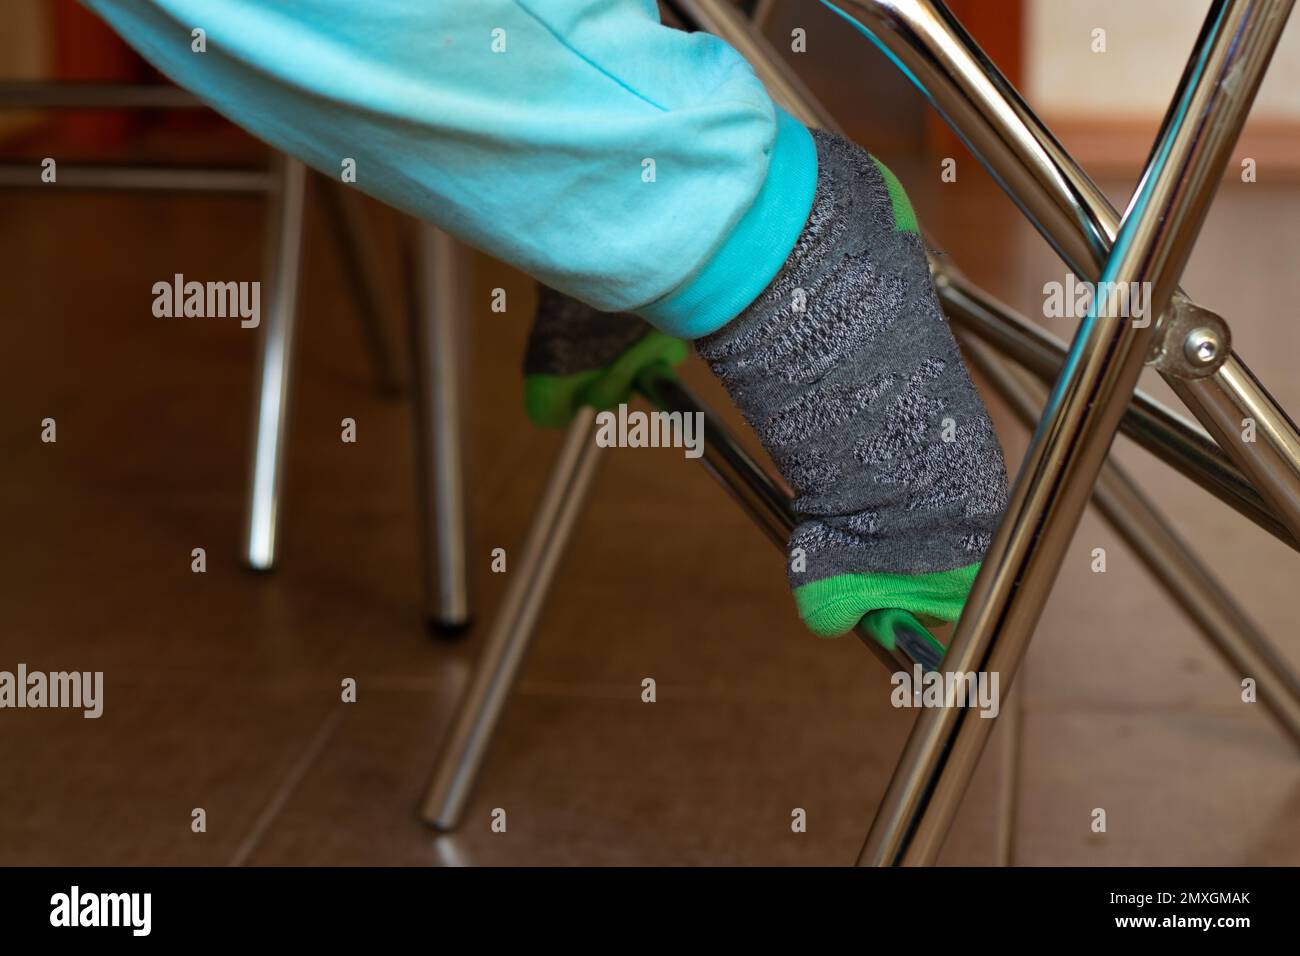 children's foot on a chair in the kitchen Stock Photo